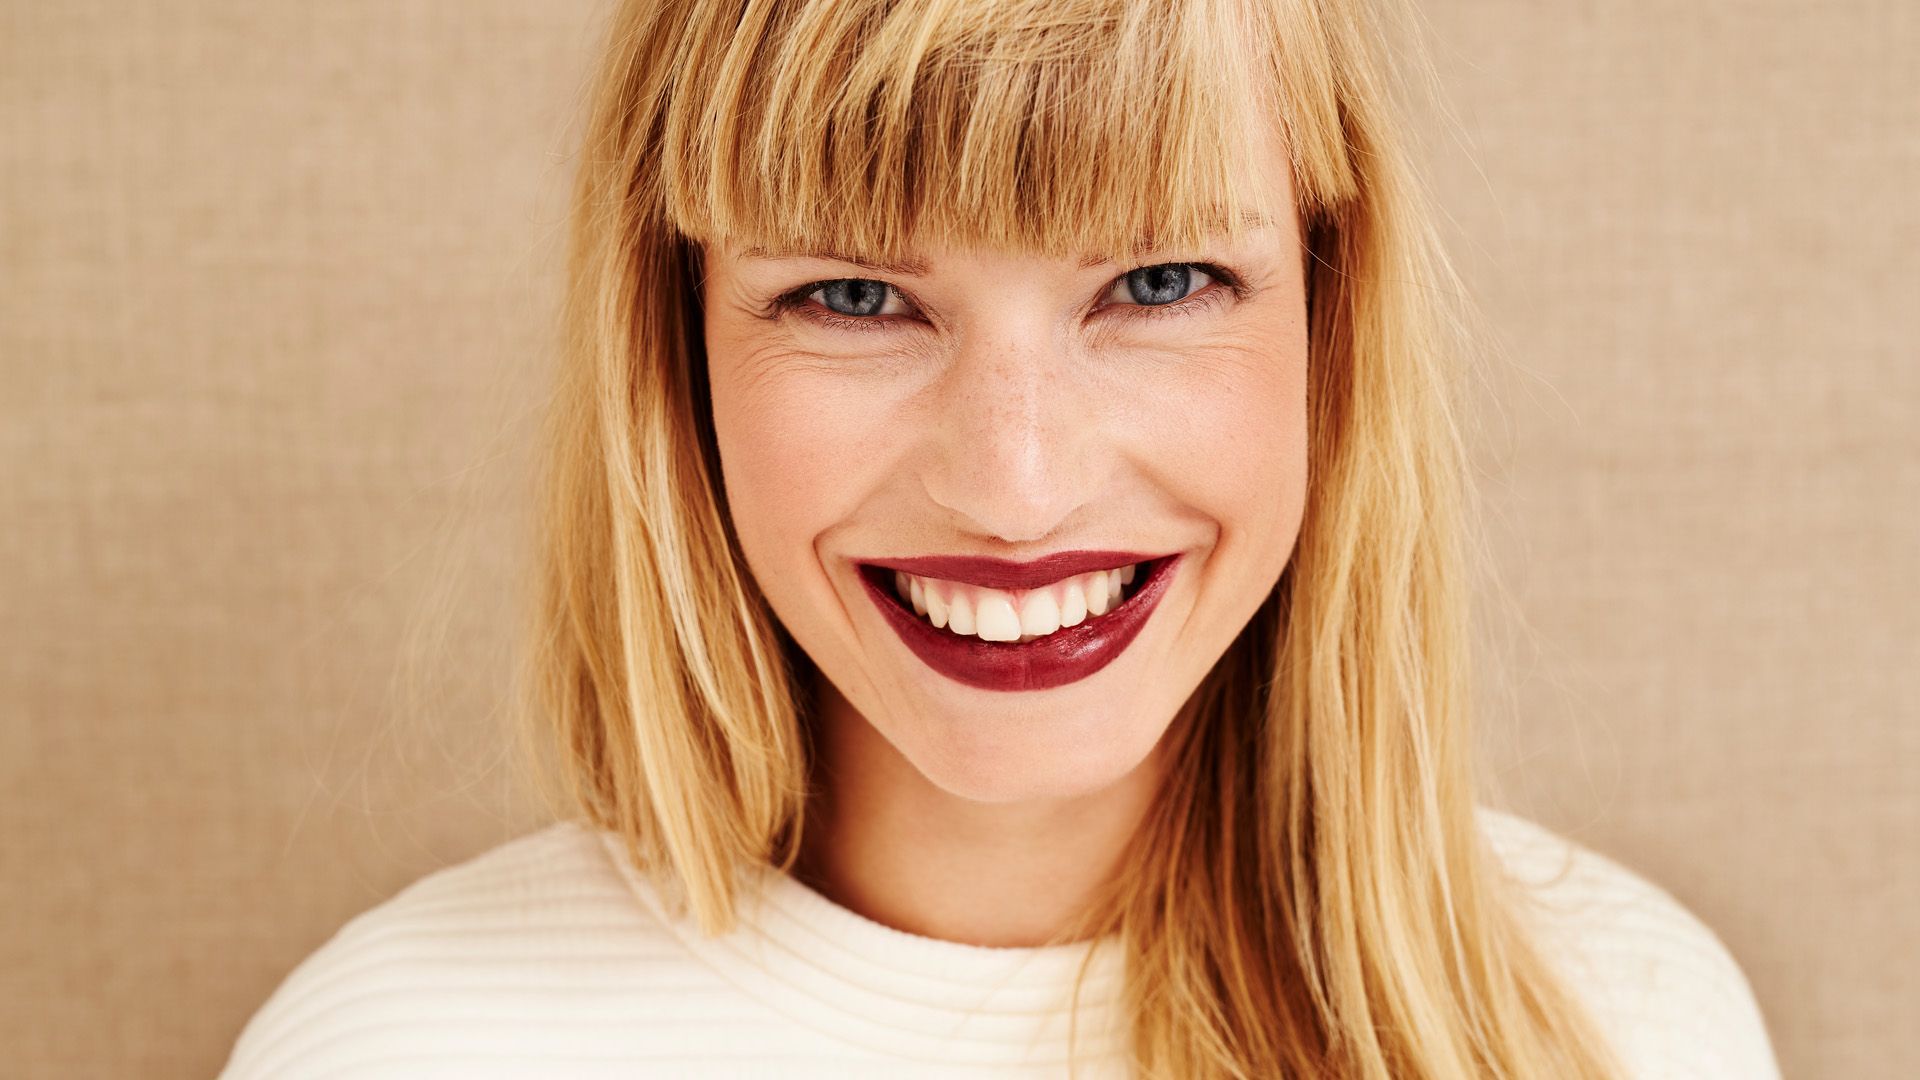 Yellow teeth? With these lipstick colors they immediately look much whiter